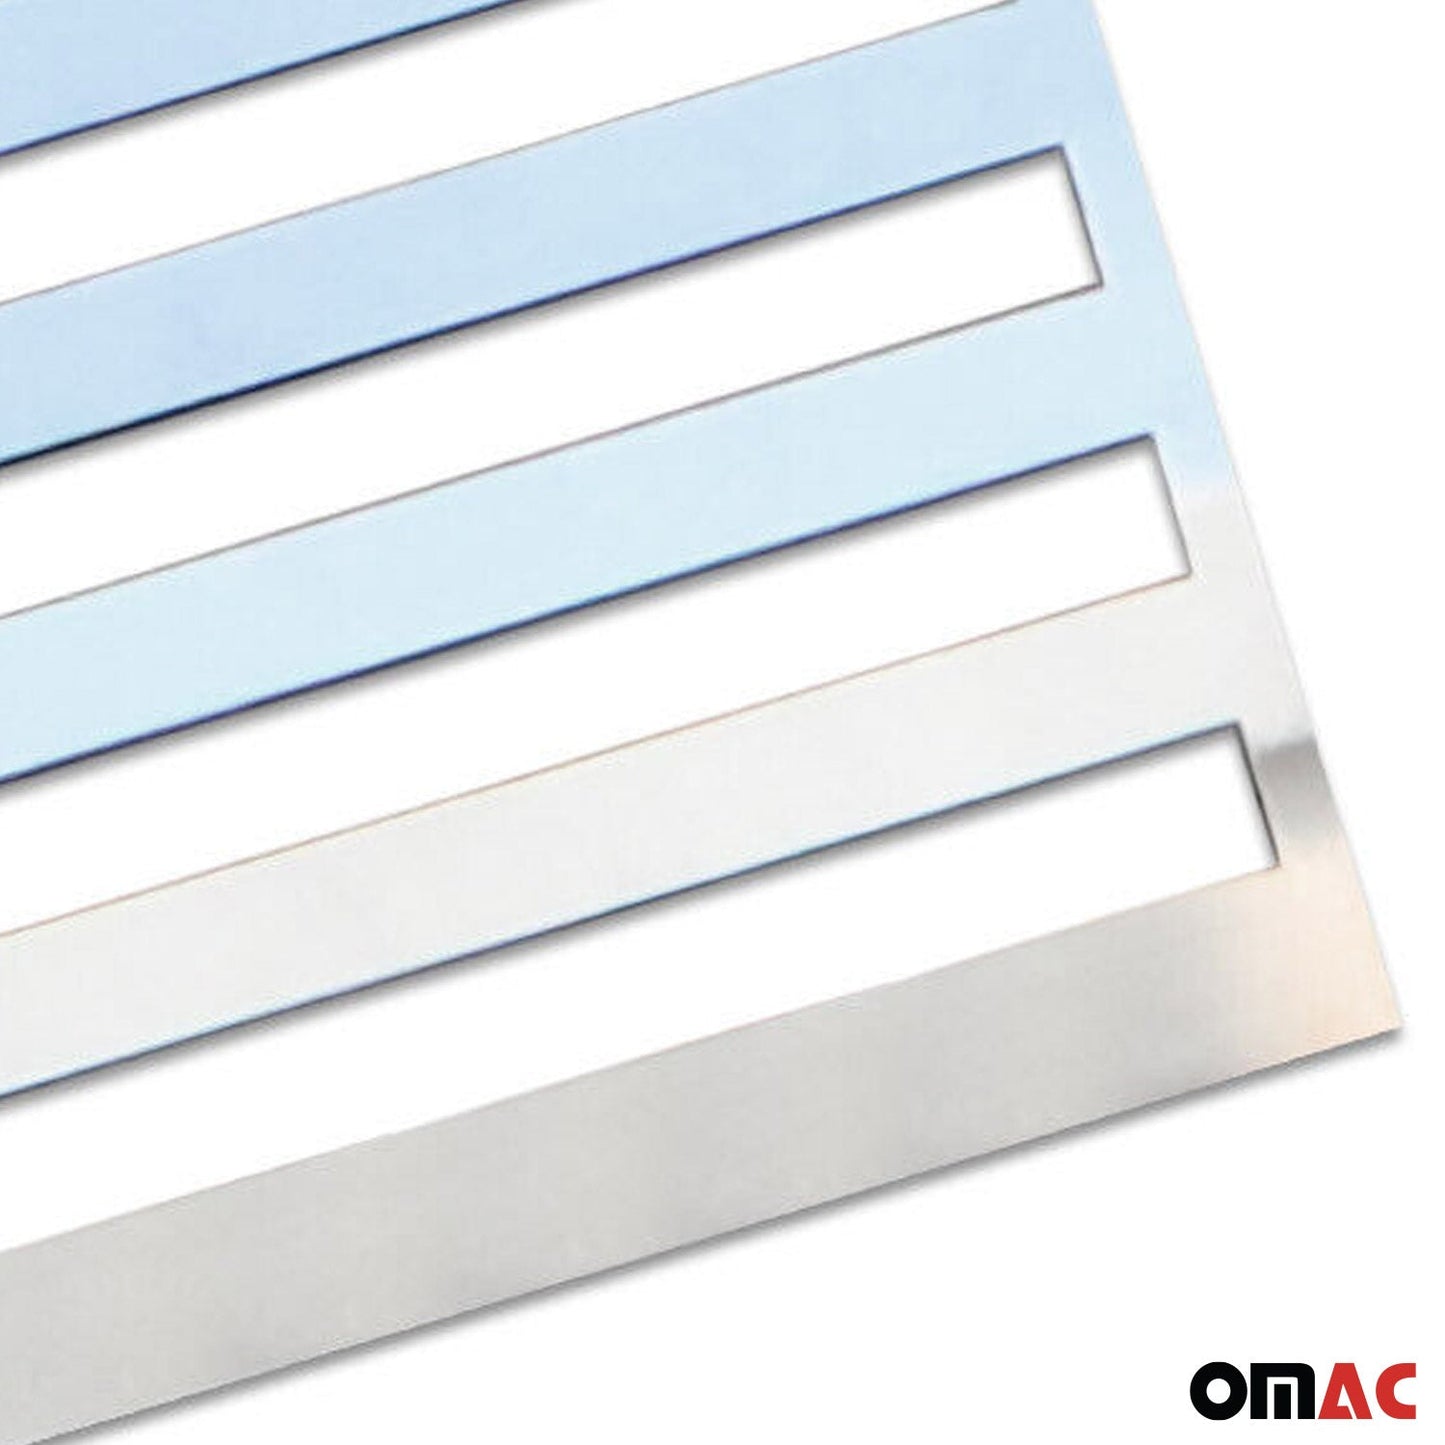 OMAC 2 Pcs US American Flag for RAM 3500 Chrome Decal Sticker Stainless Steel U022164